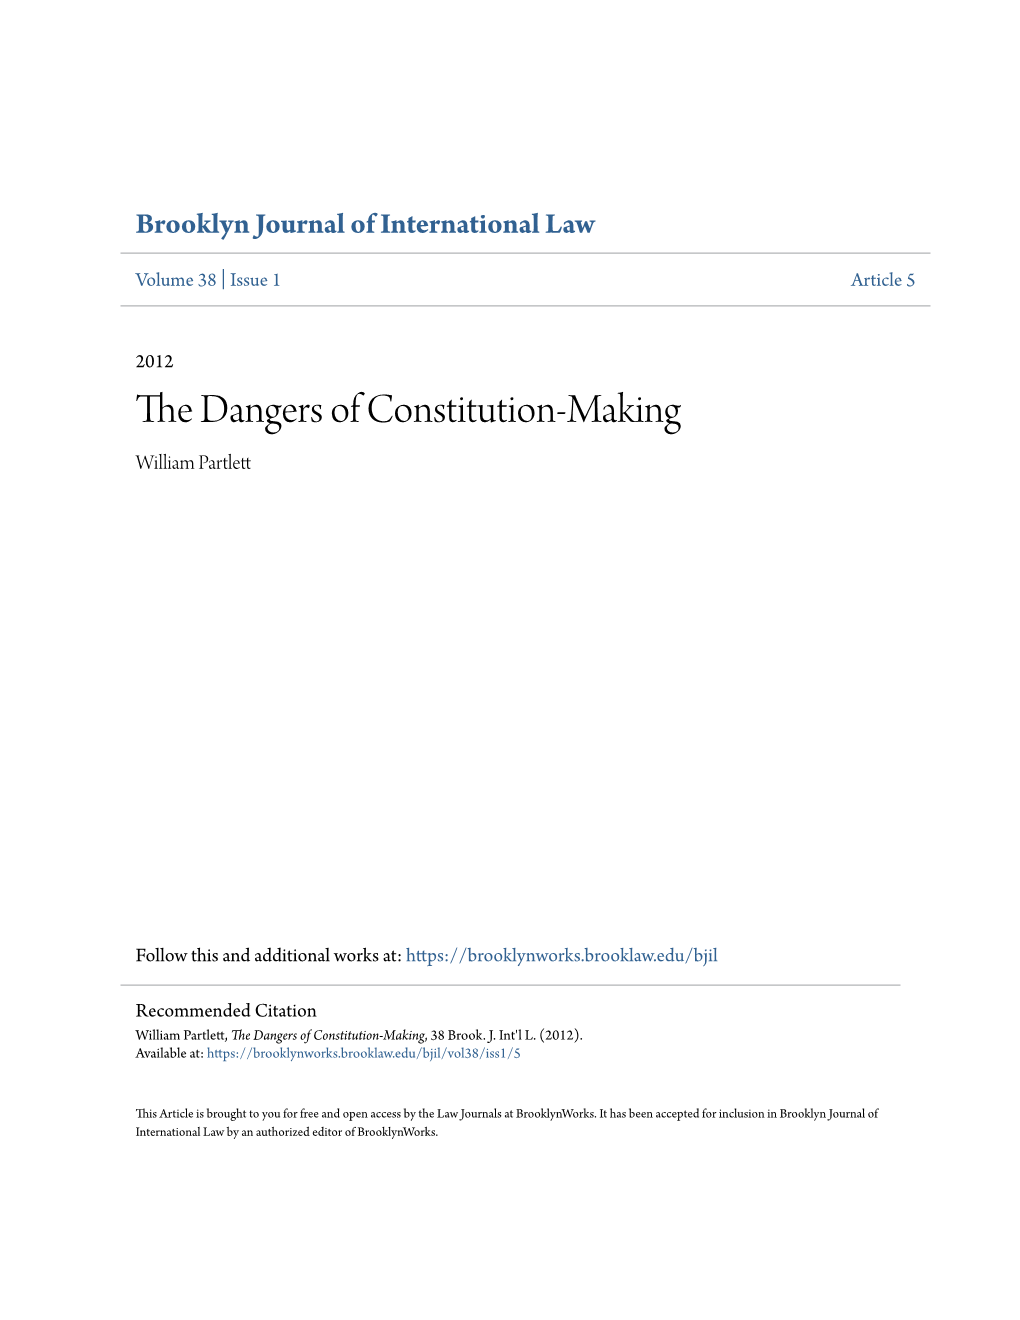 The Dangers of Constitution-Making, 38 Brook